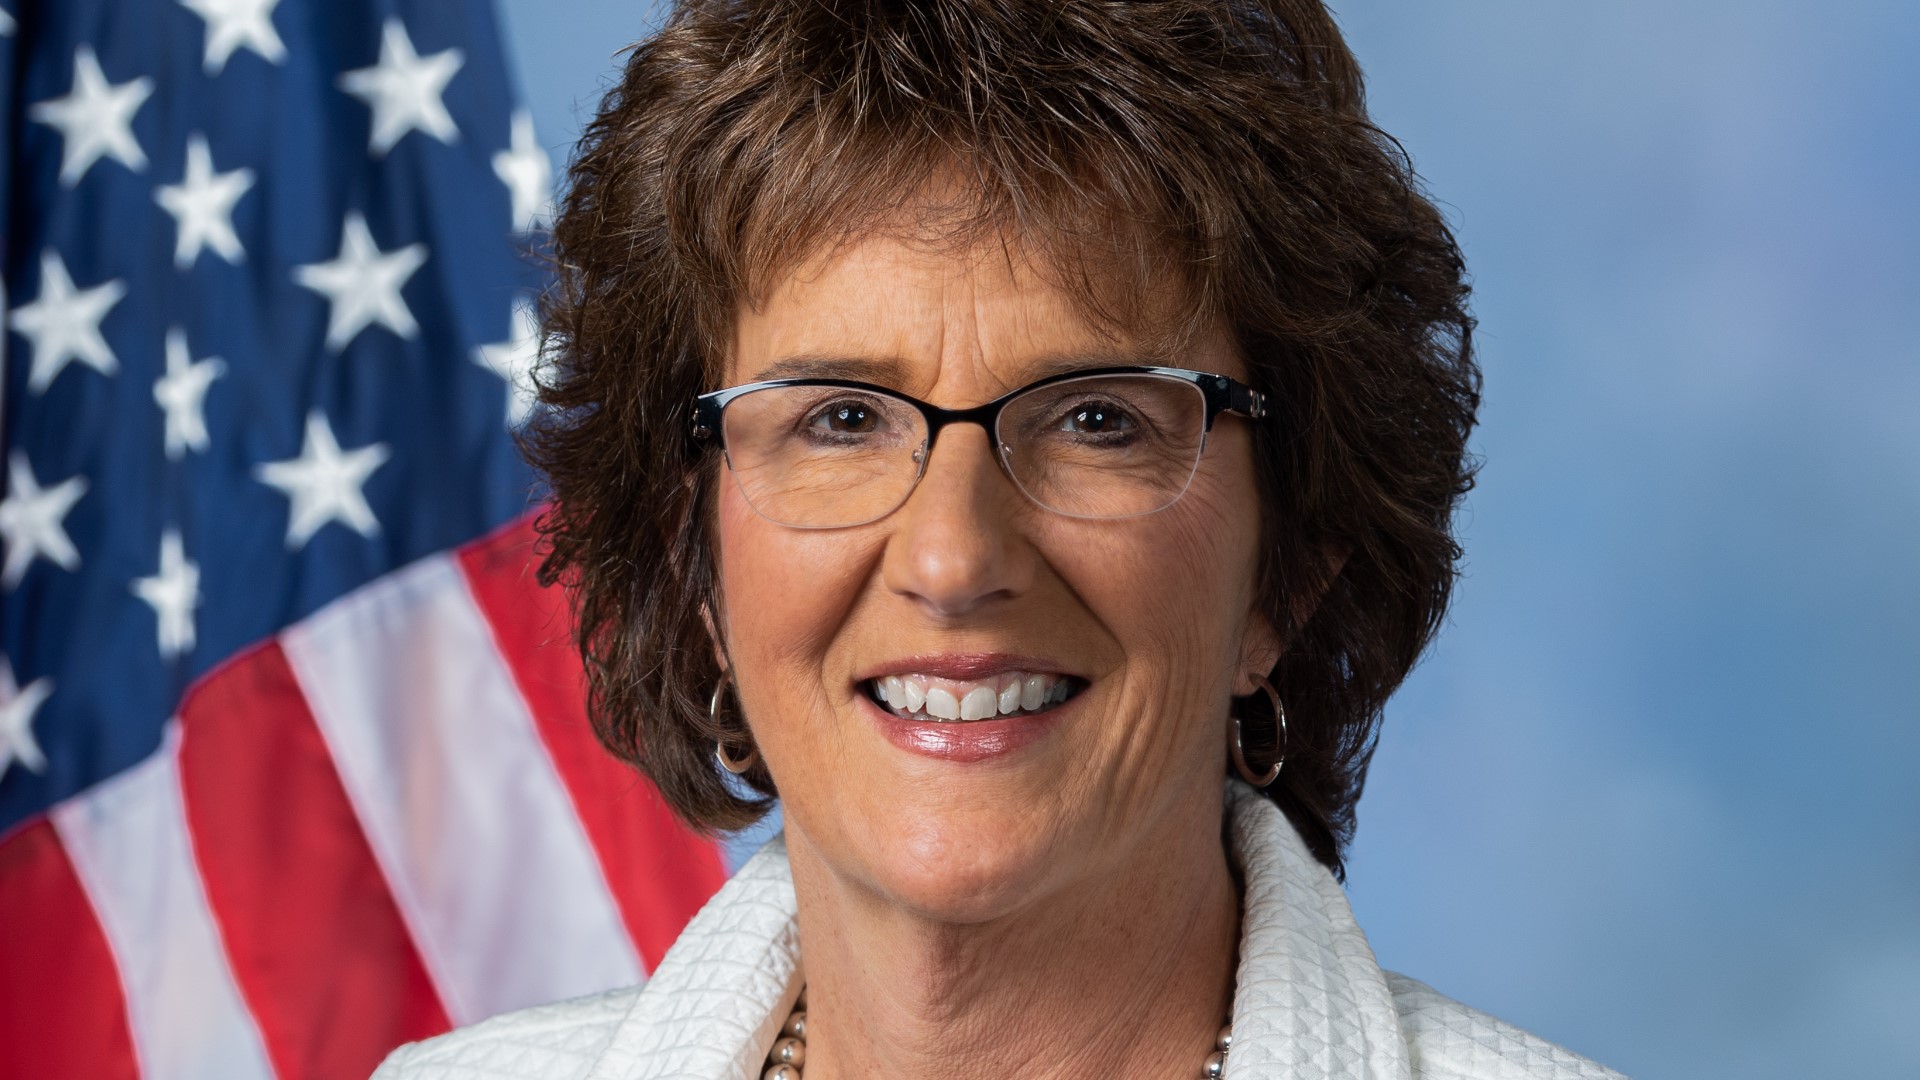 The Elkhart County sheriff said Thursday that the SUV carrying Rep. Jackie Walorski veered into the path of an oncoming car Wednesday.